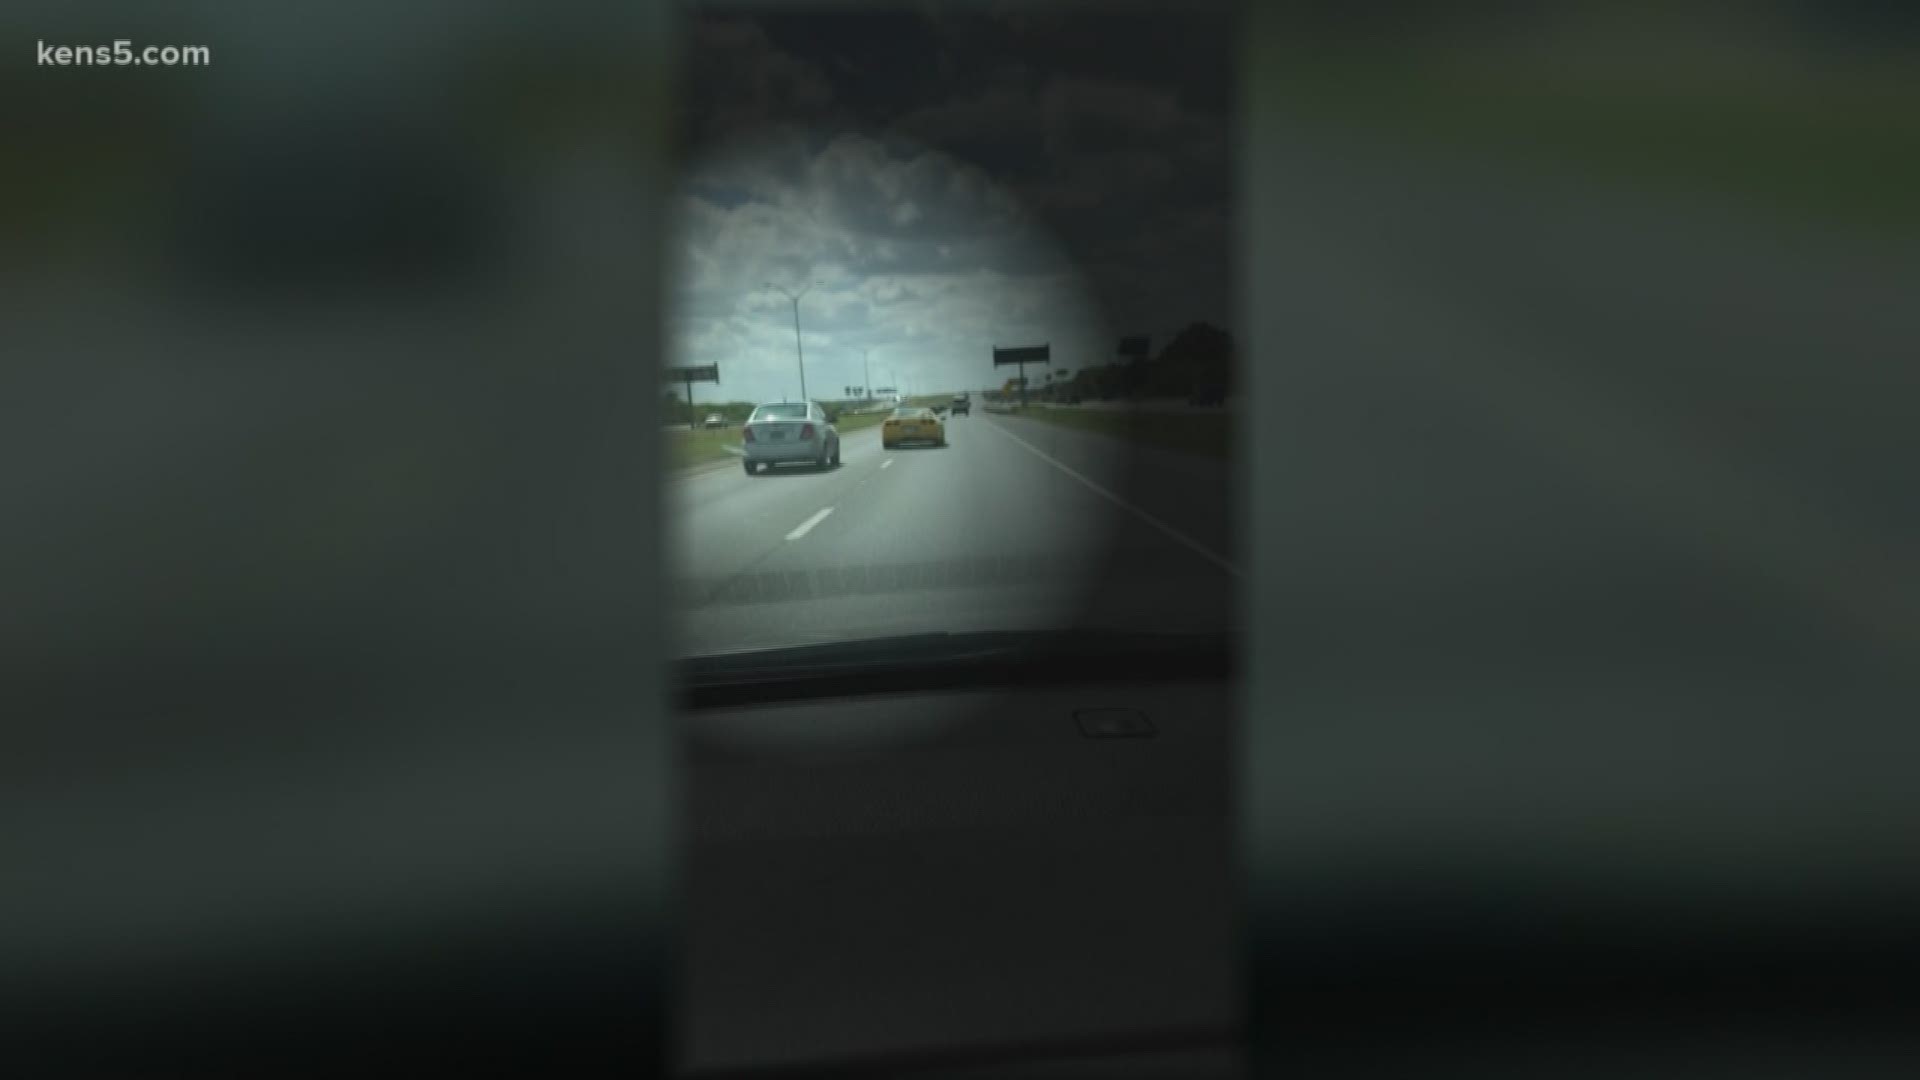 A dangerous driver swerving and nearly slamming into other cars. The woman who recorded his driving took charge of the situation and helped his capture.